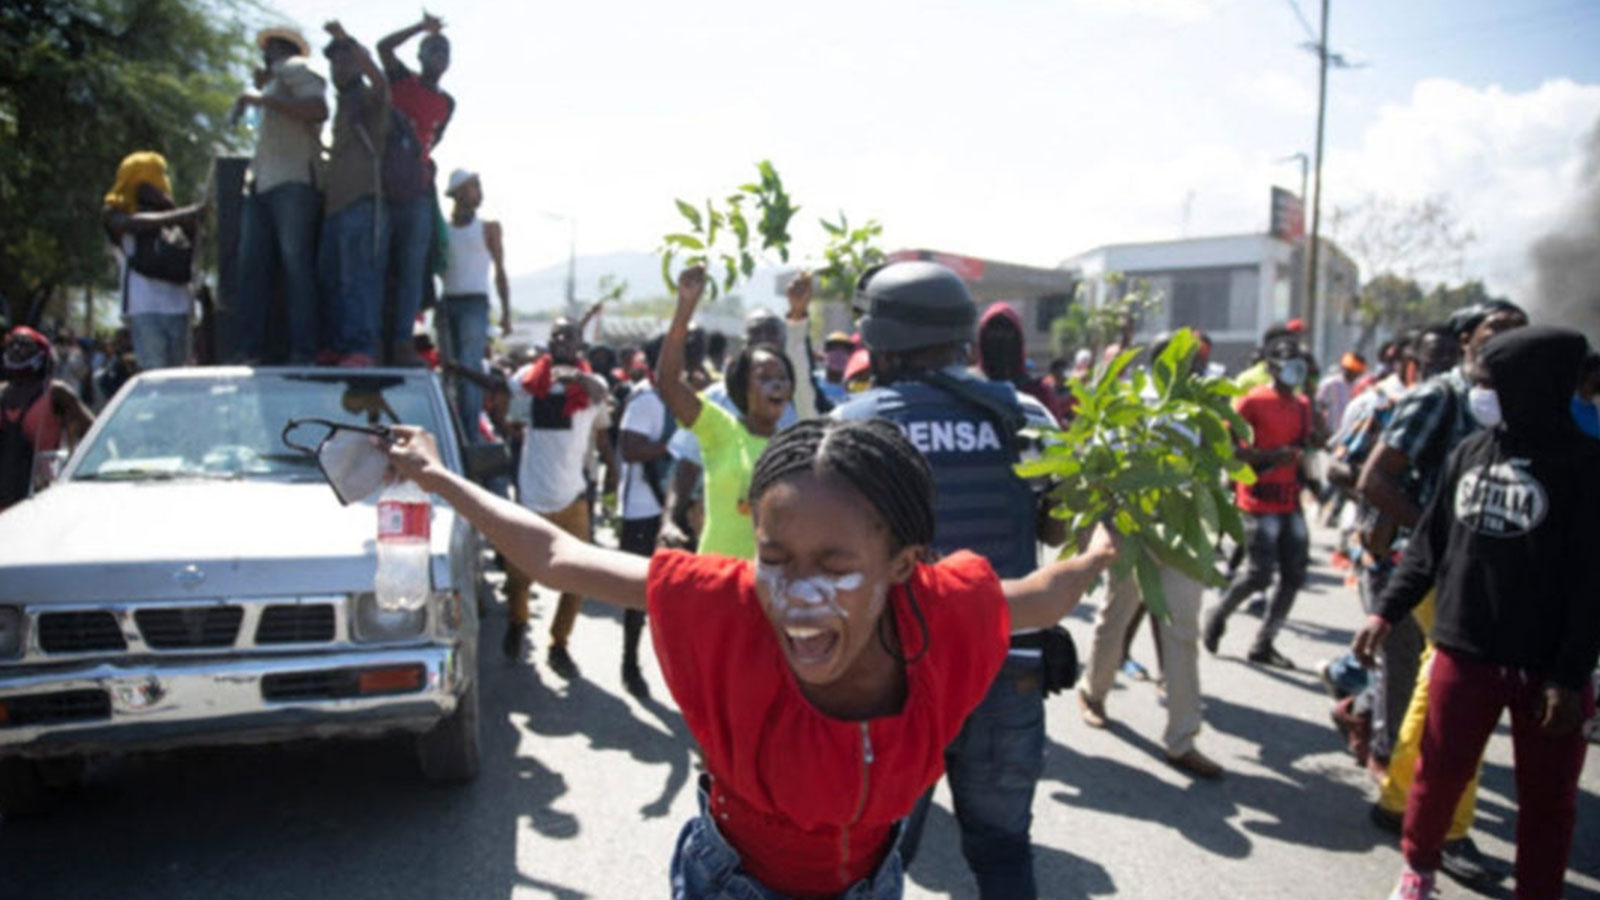 Factory workers in Port-au-Prince, Haiti, chant anti-government slogans during a protest demanding a salary increase.